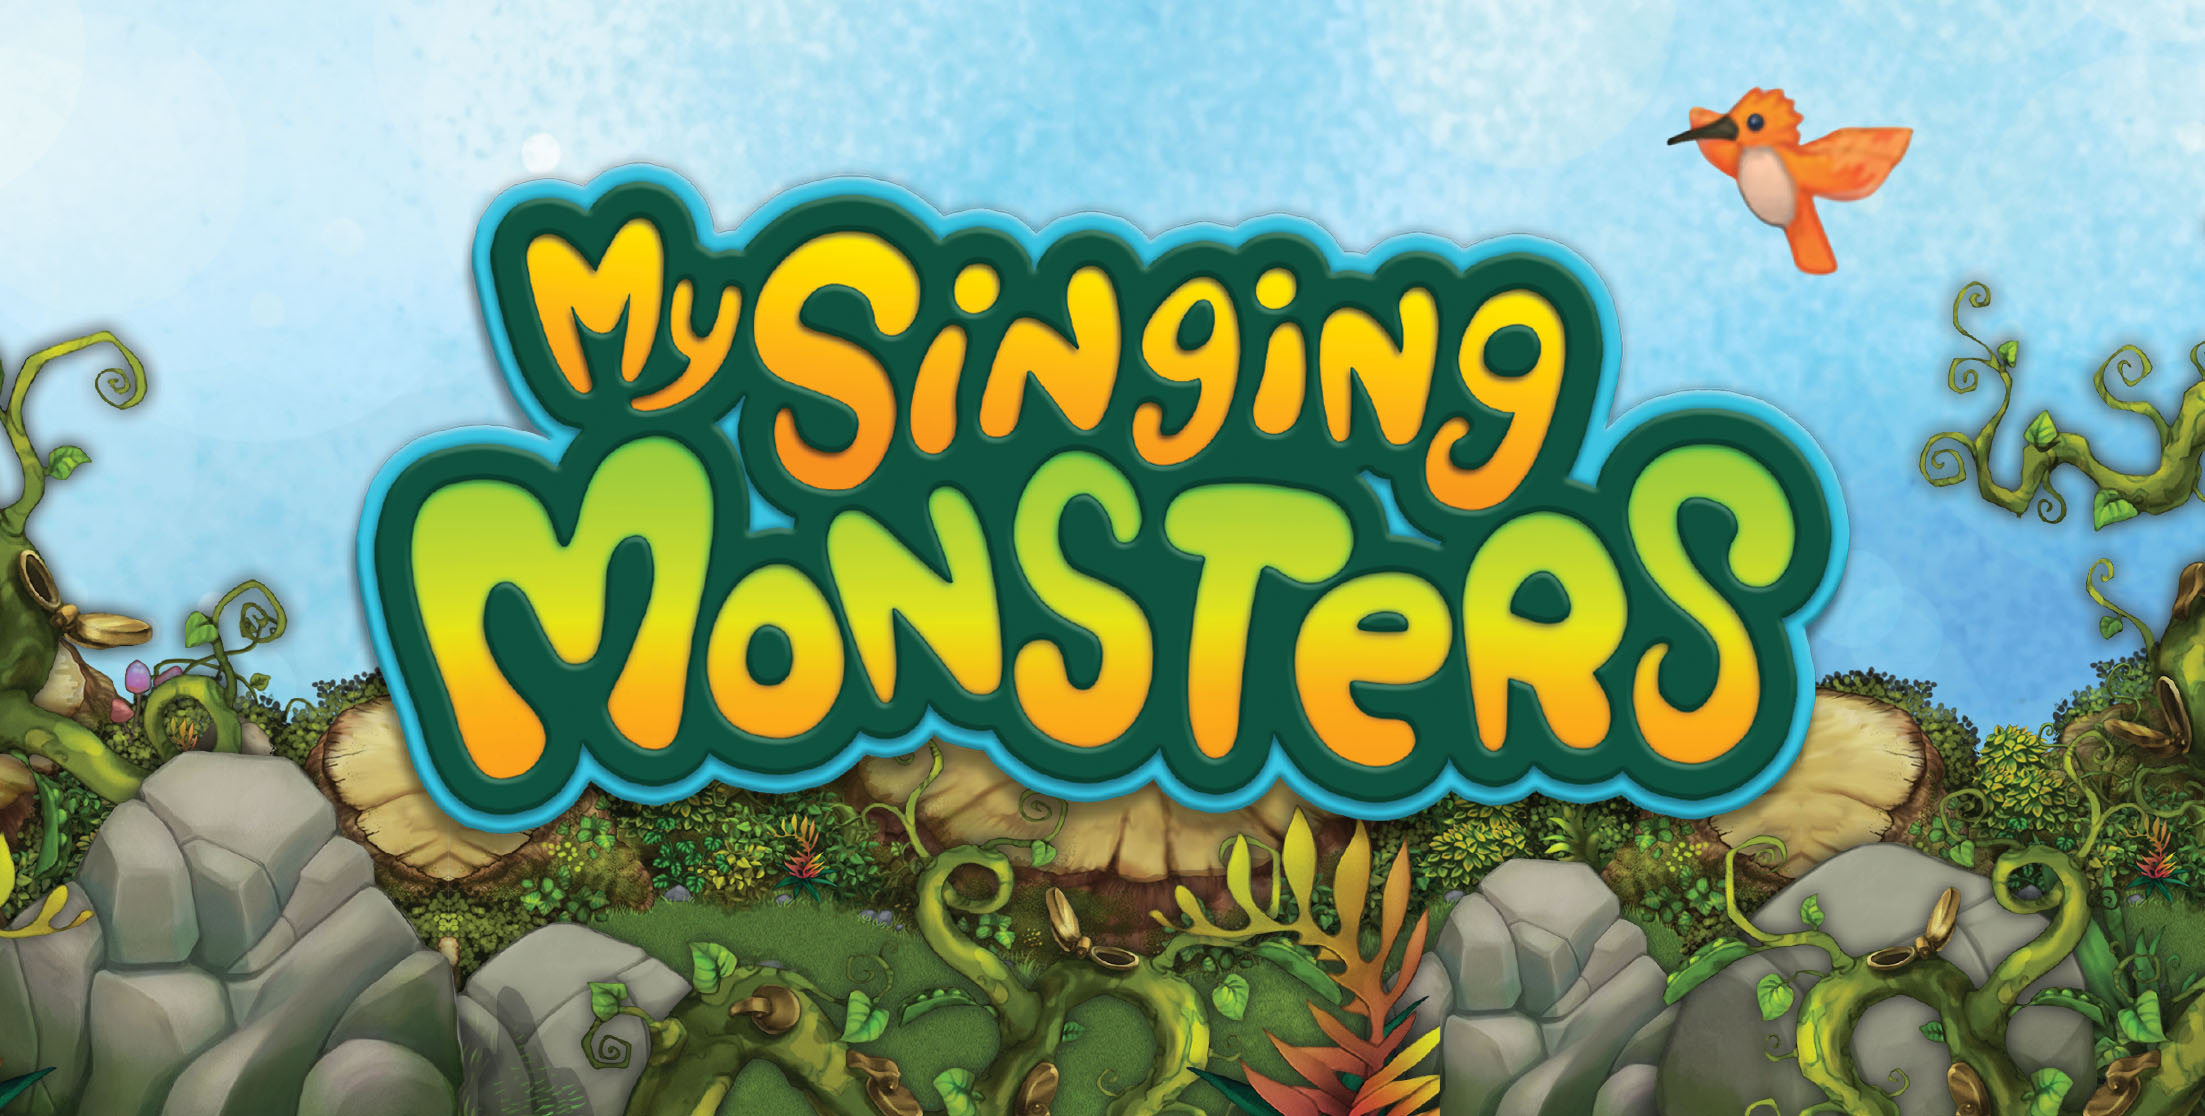 My Singing Monsters on X Wallpaper 11 what if you woke up the Wublins  and then the Wublins became the first thing you saw when YOU woke up   httpstcoNHpMa6pK3W  X